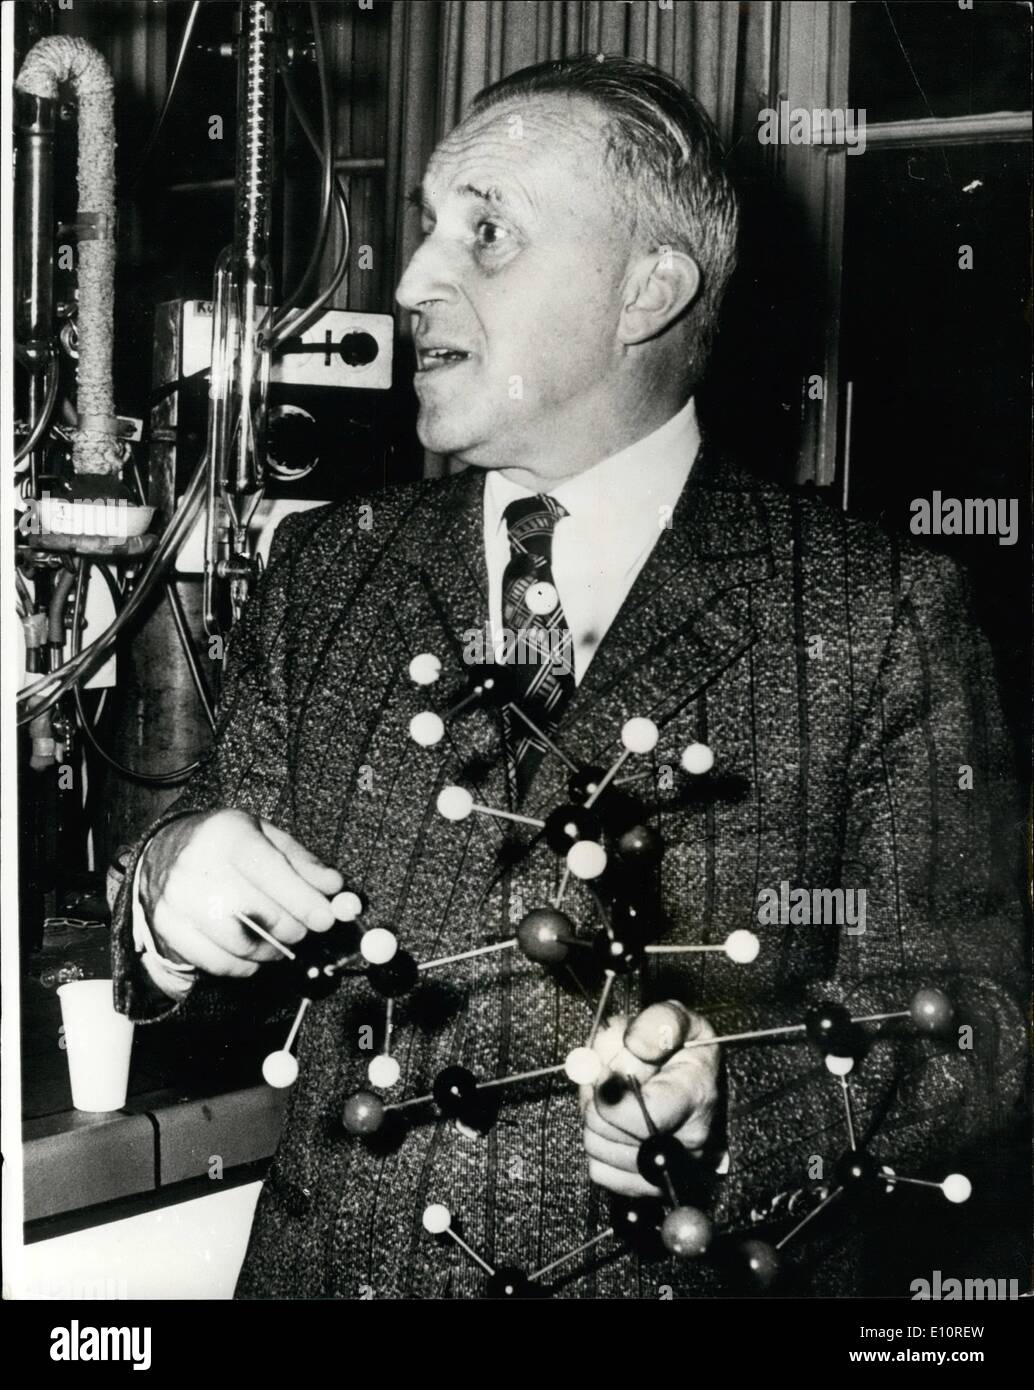 Oct. 10, 1973 - Nobel Prize Winner.: Photo shows Dr. Ernst Otto Fischer of Professor of Inorganic Chemistry at Munich University, who shares the Nobel Prize for Chemistry with Dr. Wilkinson, Professor of Inorganic Chemistry at Imperial College, London. Stock Photo